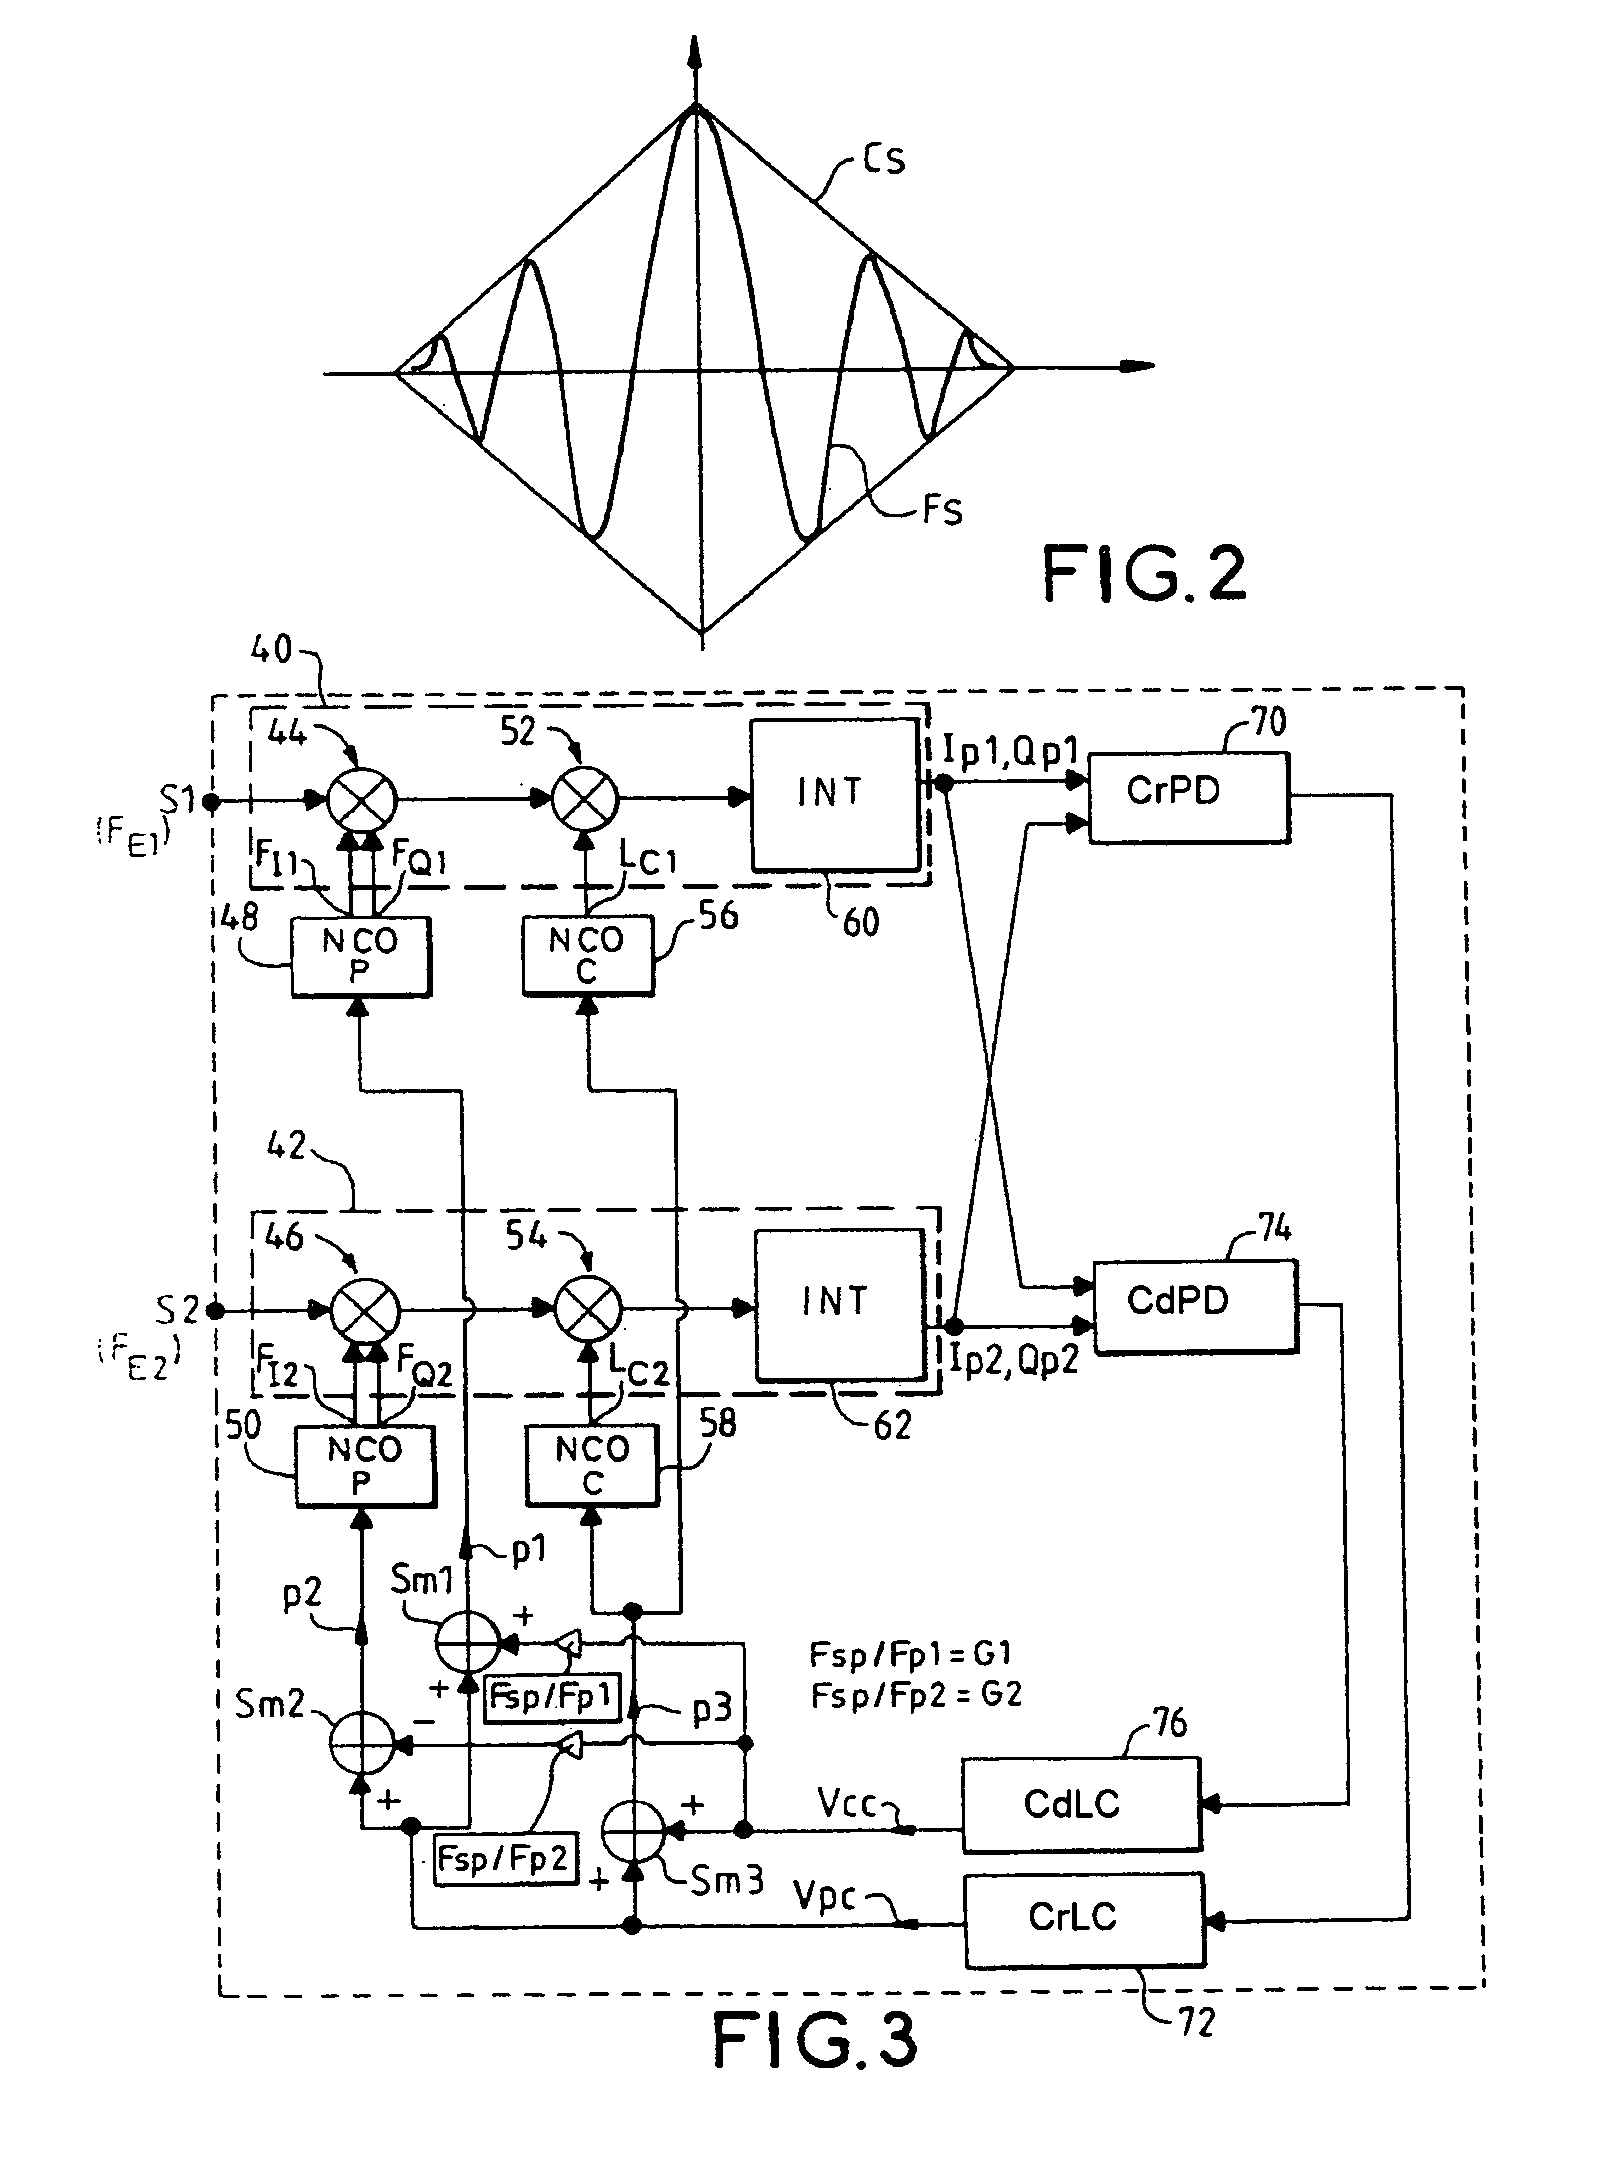 Satellite positioning receiver using two signal carriers